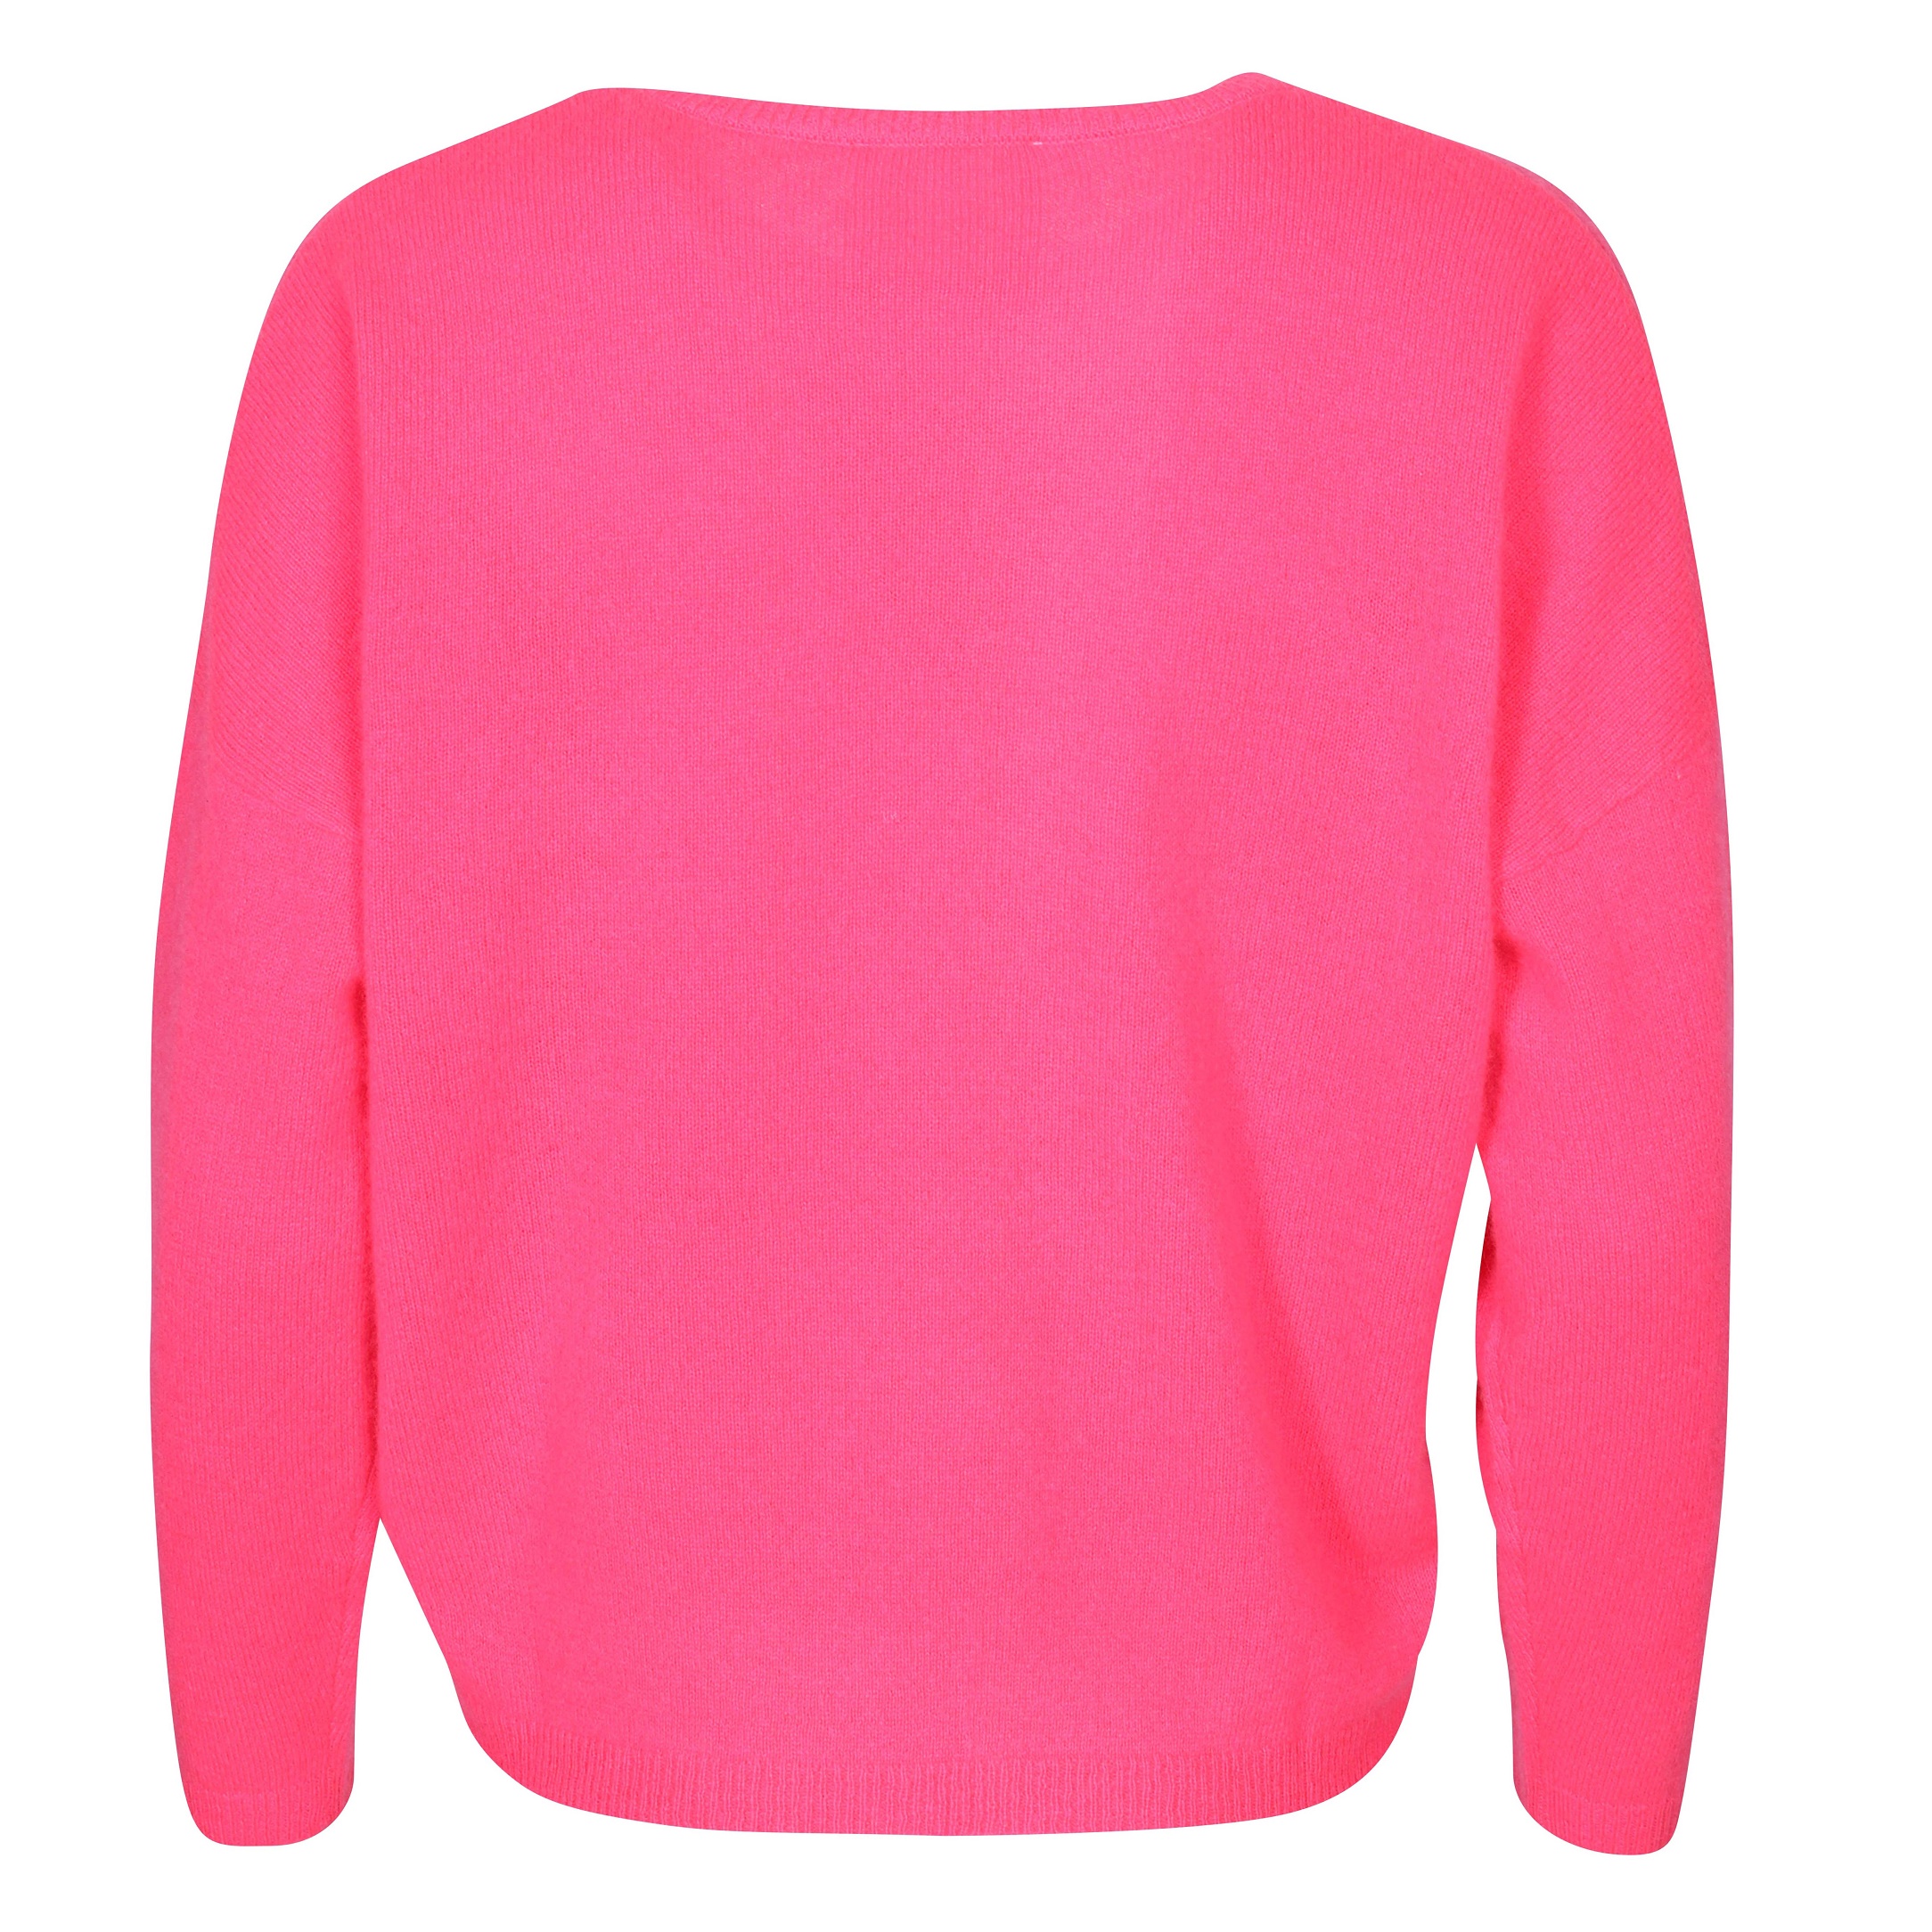 Absolut Cashmere Kaira Cashmere Pullover in Rose Fluo L